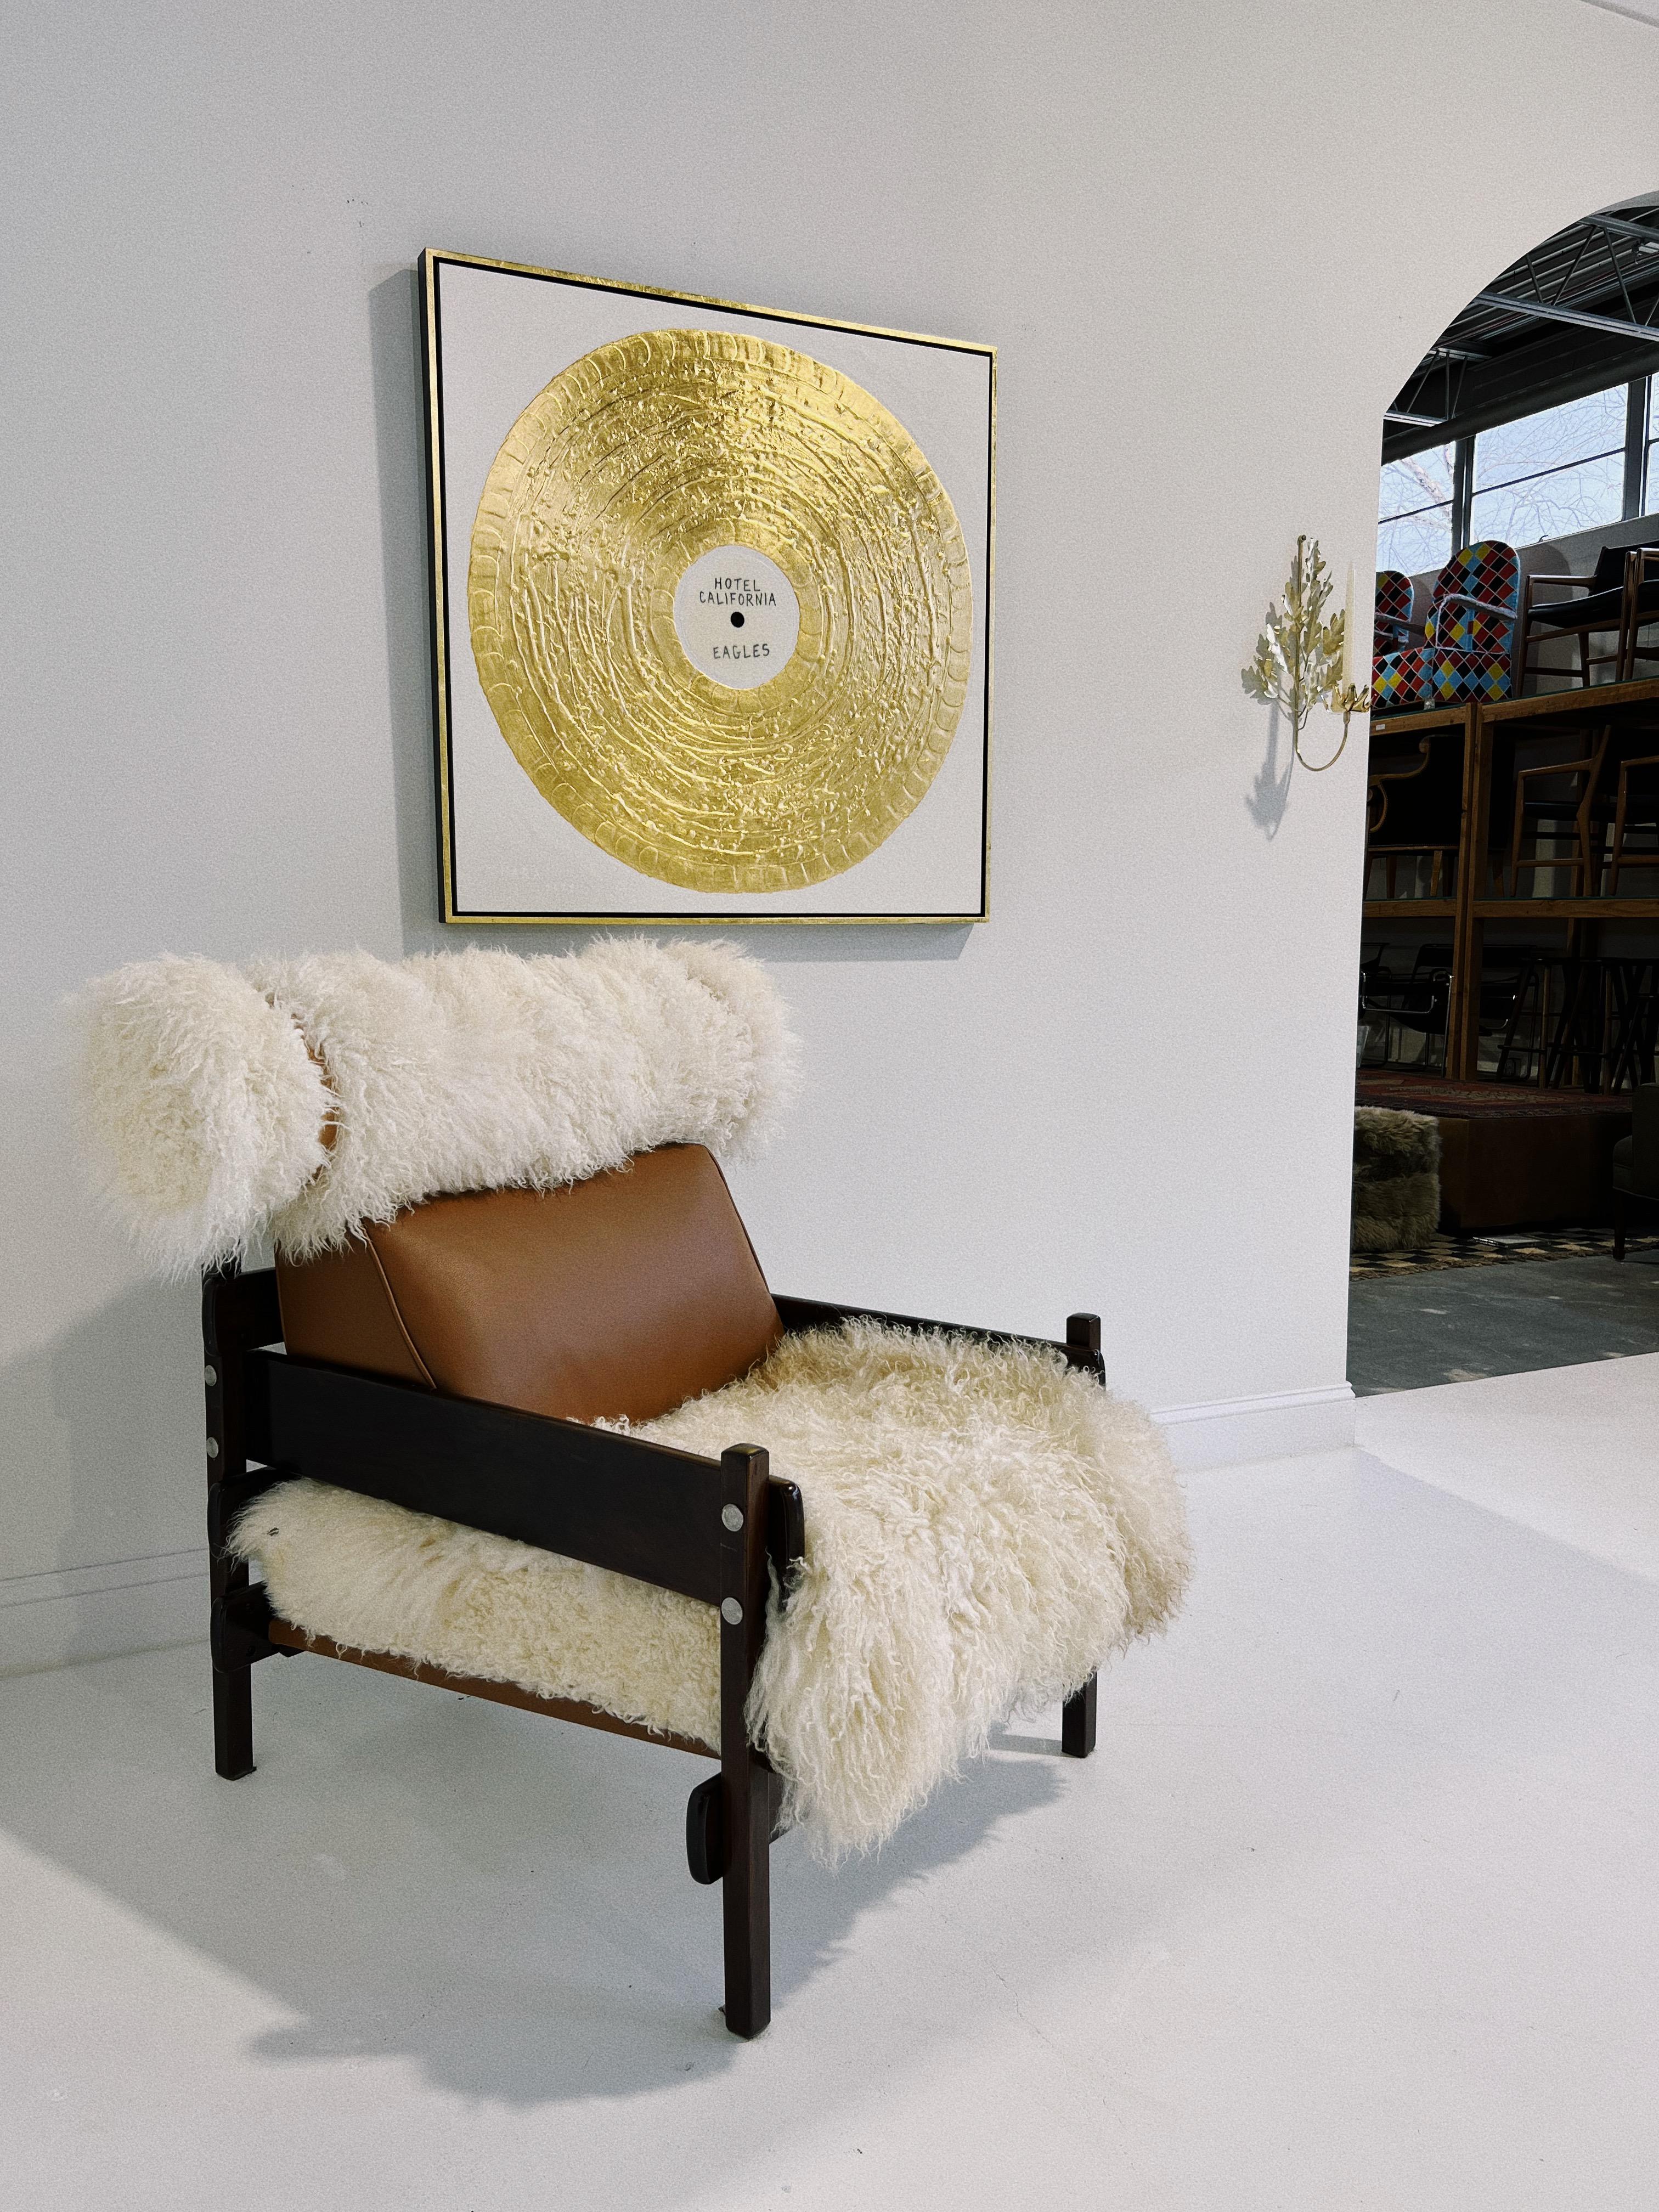 One of a kind sergio rodrigues tonico chair restored in gotland sheepskin and Loro Piana Italian buffalo leather. By Forsyth in Saint Louis.

Brazilian architect-designer Sergio Rodrigues was born in 1927 in Rio de Janeiro to a family of prominent